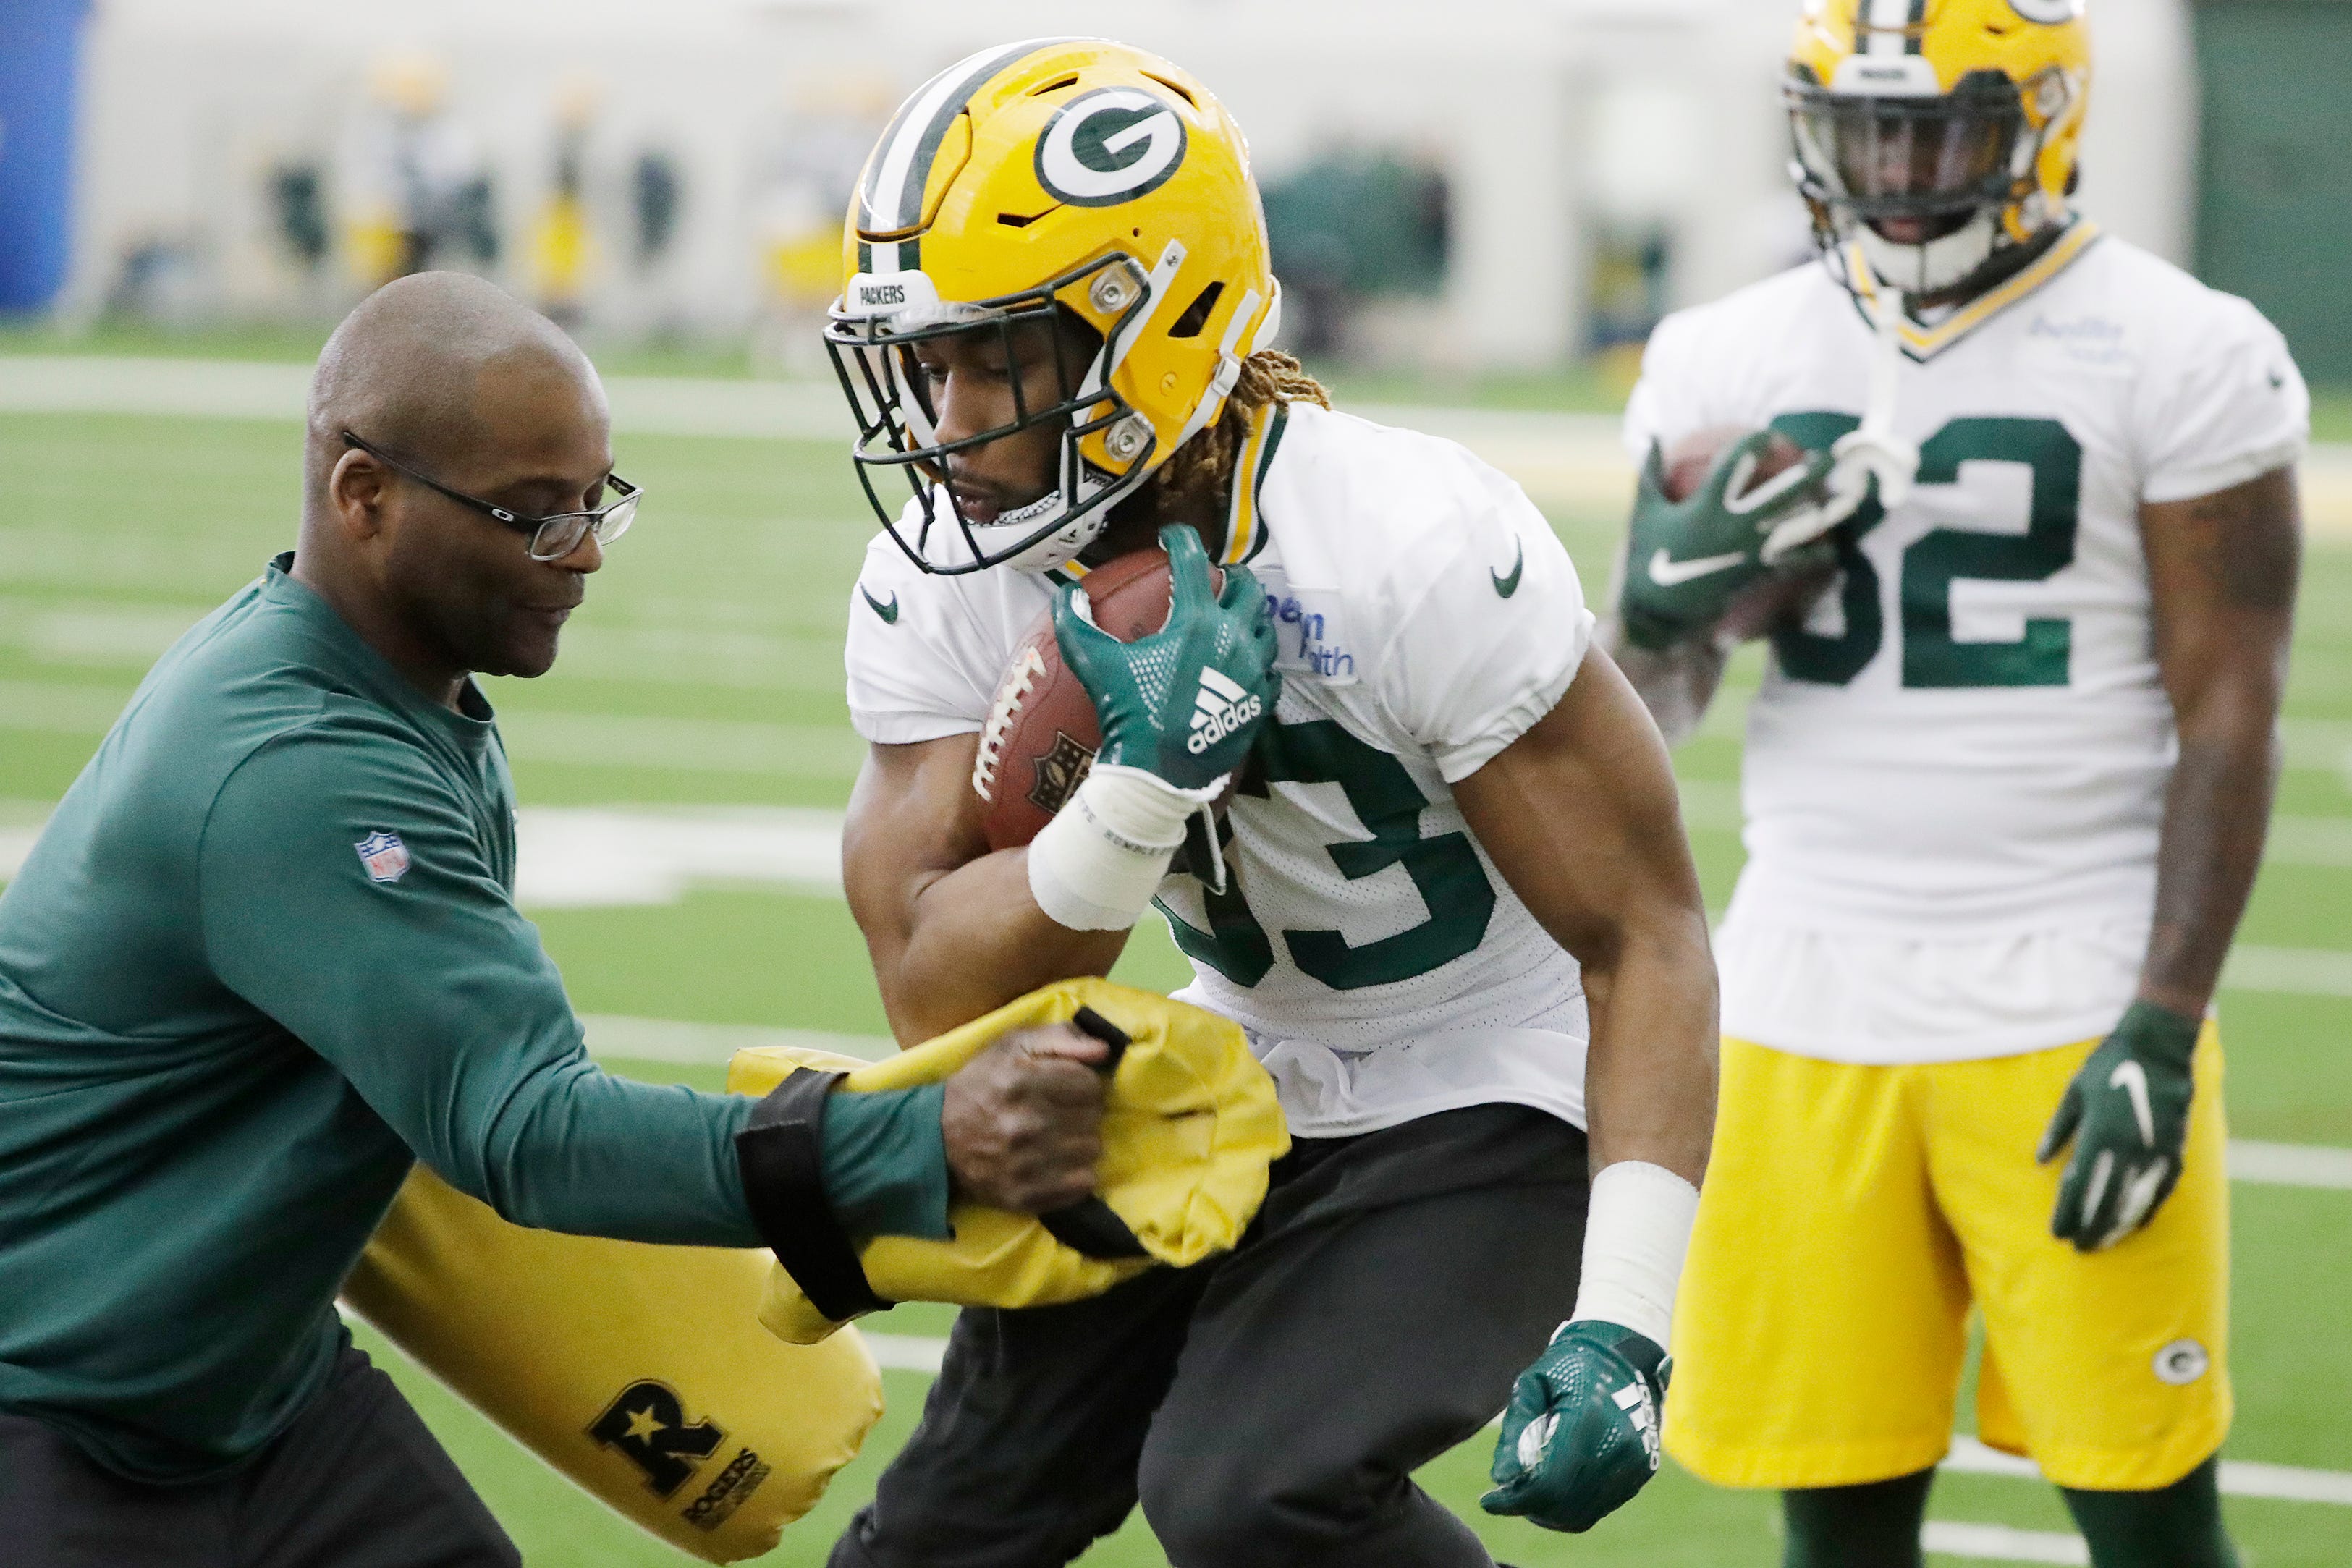 Green Bay Packers running back Aaron Jones (33) during a team practice at the Don Hutson Center on Wednesday, April 24, 2019 in Ashwaubenon, Wis.